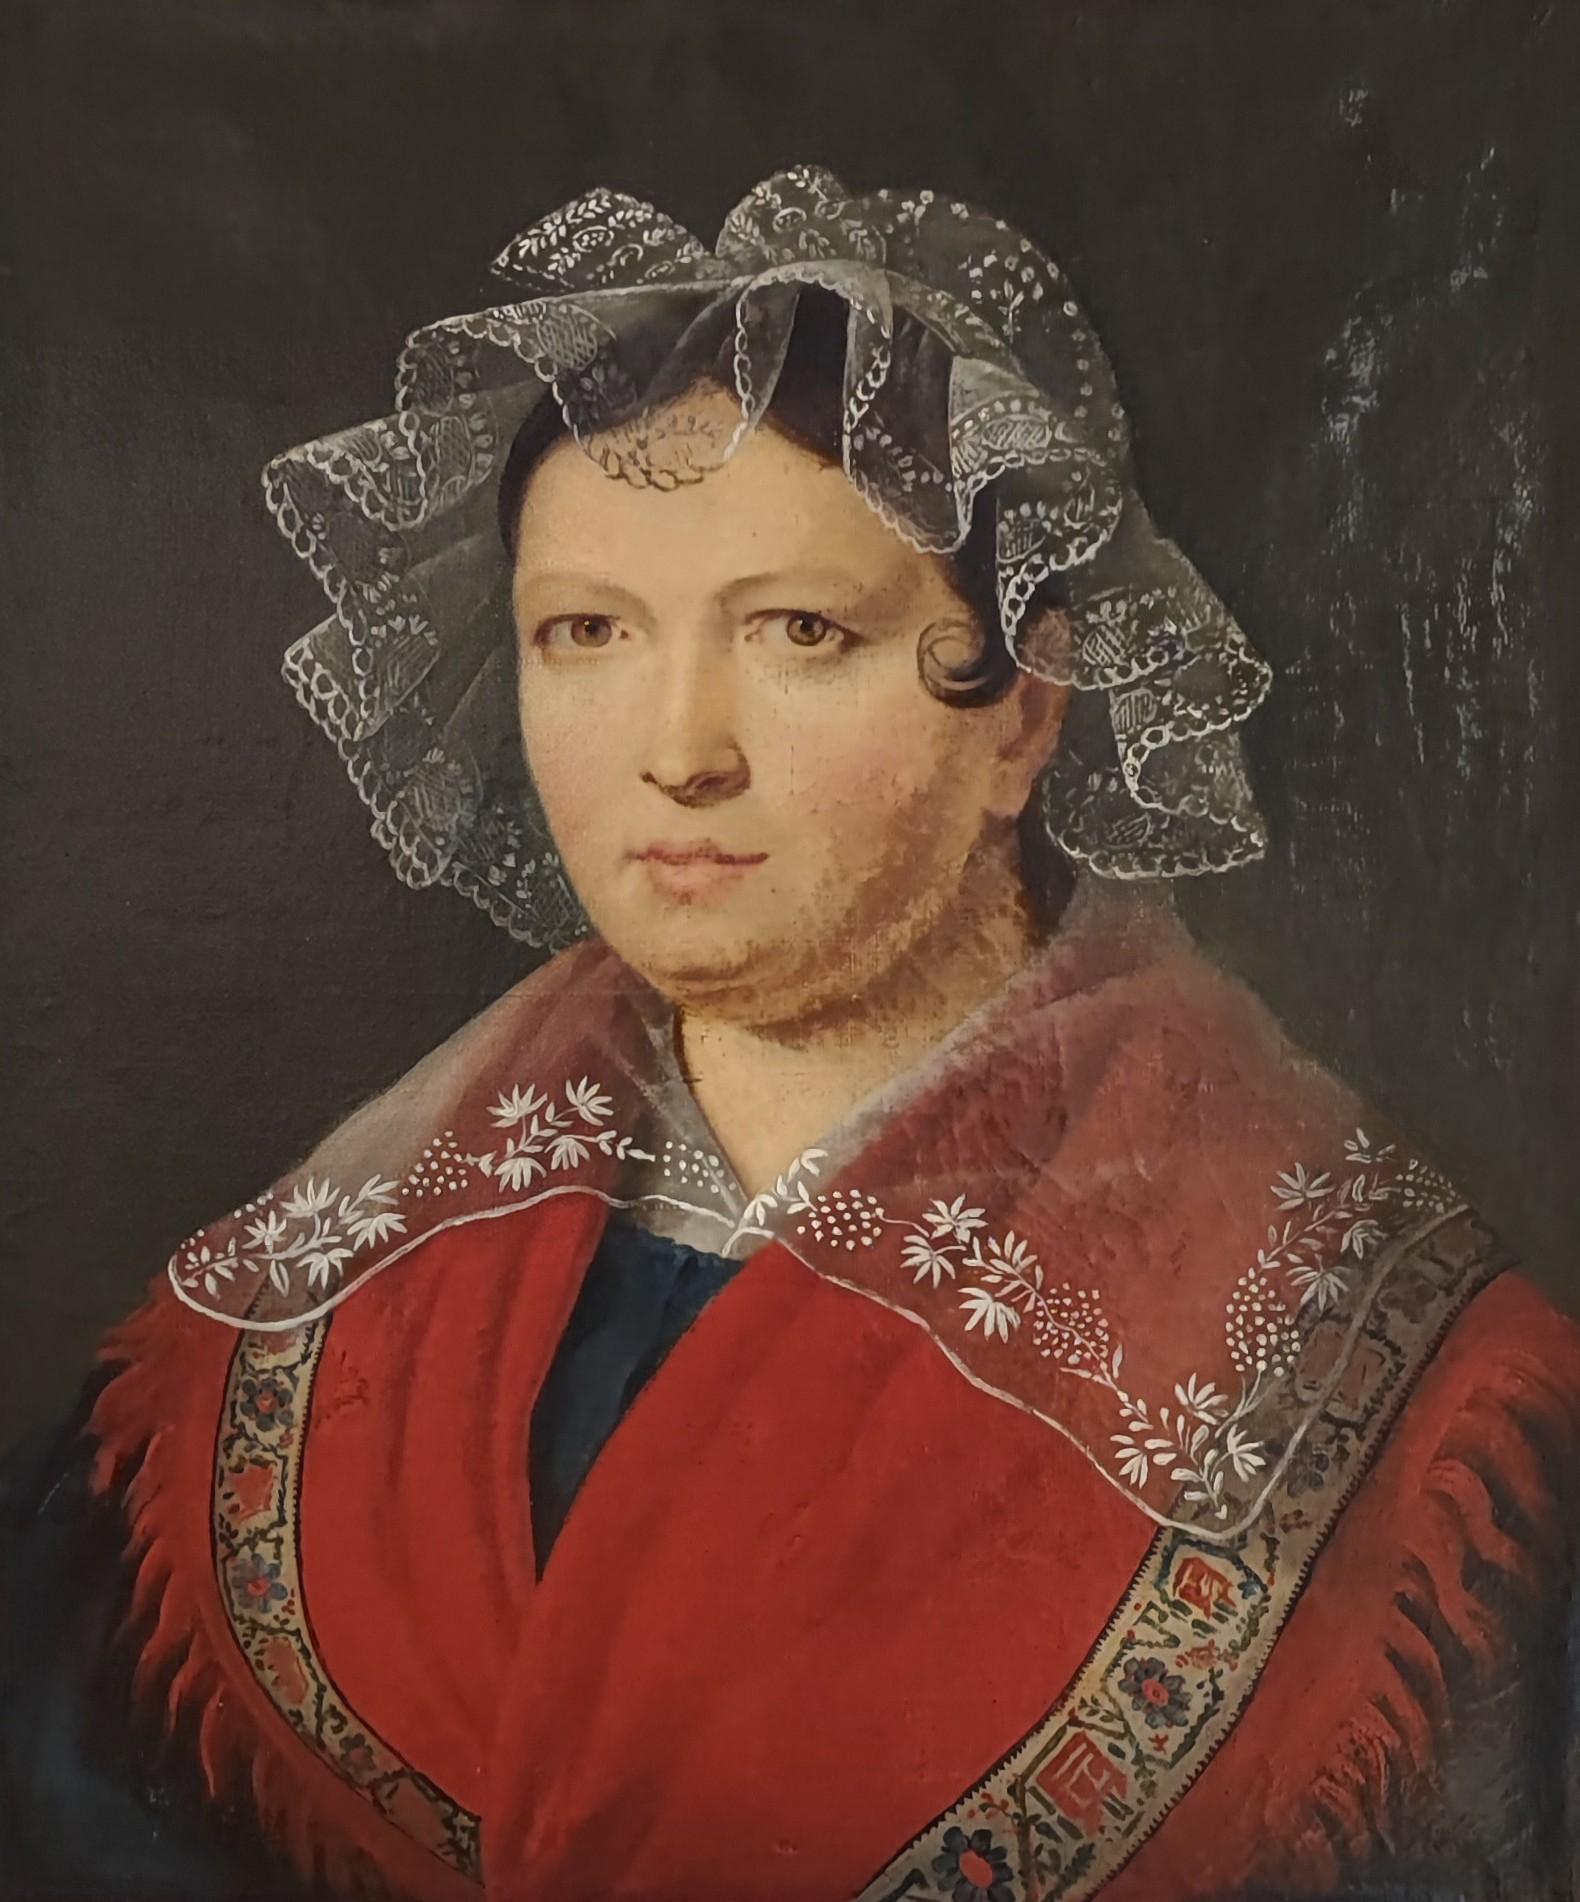 Unknown Portrait Painting - Woman with red shawl and muslin headdress